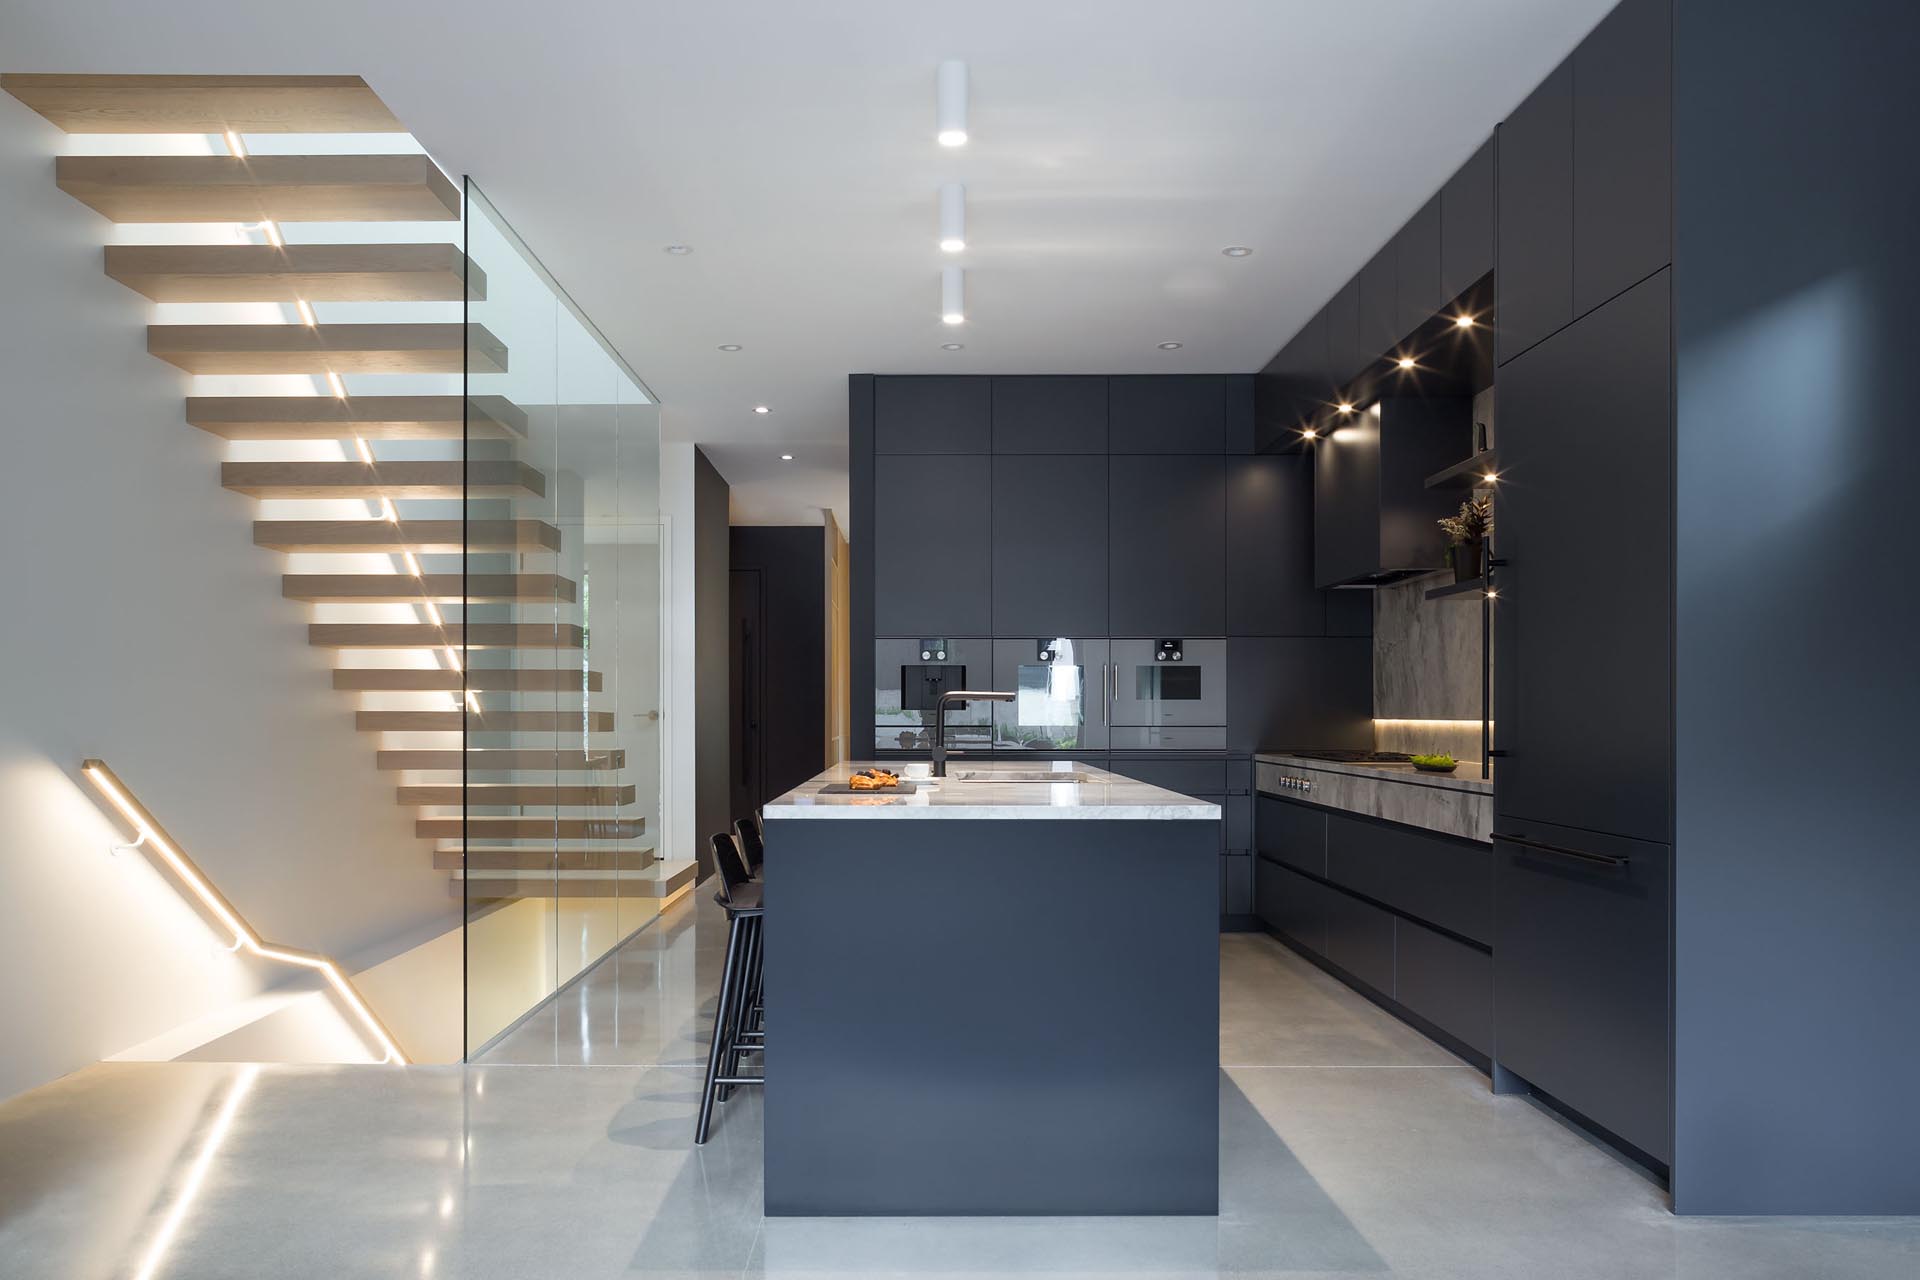 In this modern kitchen, there's black lacquered kitchen millwork, Gaggenau appliances and an integrated fridge, as well as marble countertops. Adjacent to the kitchen is a floating cantilevered wood staircase that includes a handrail with hidden lighting.